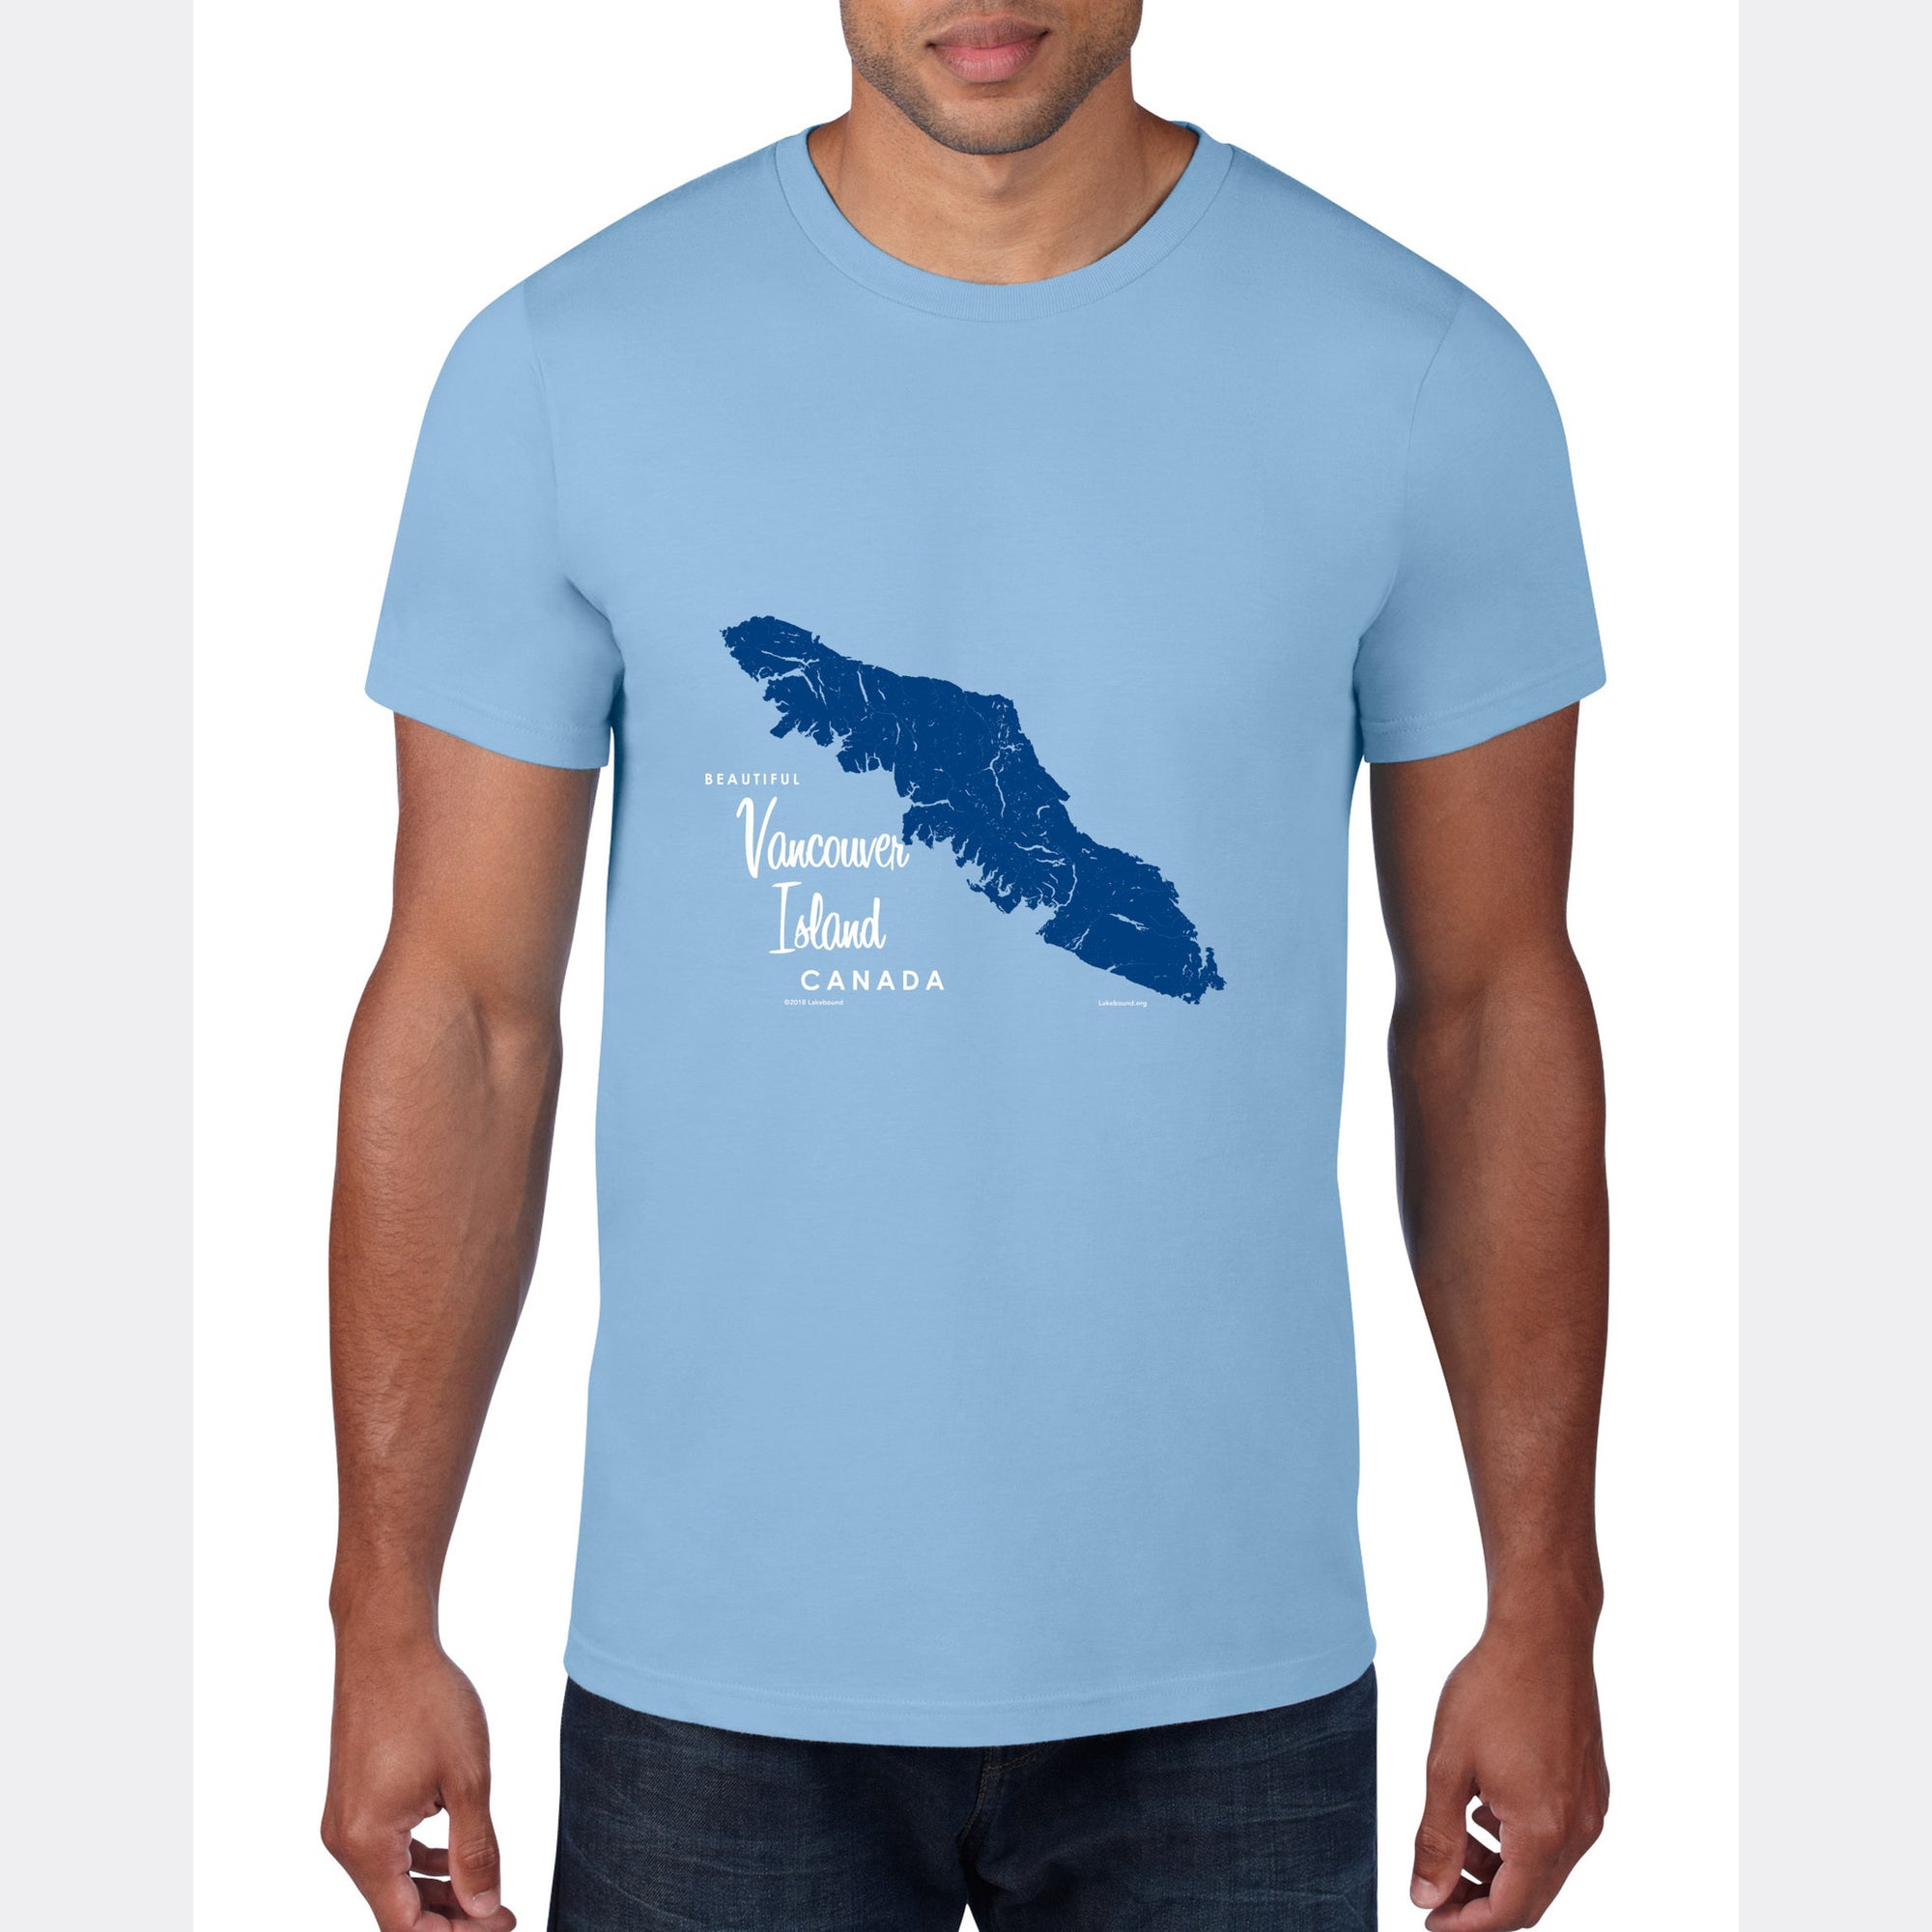 Vancouver Island Canada, T-Shirt